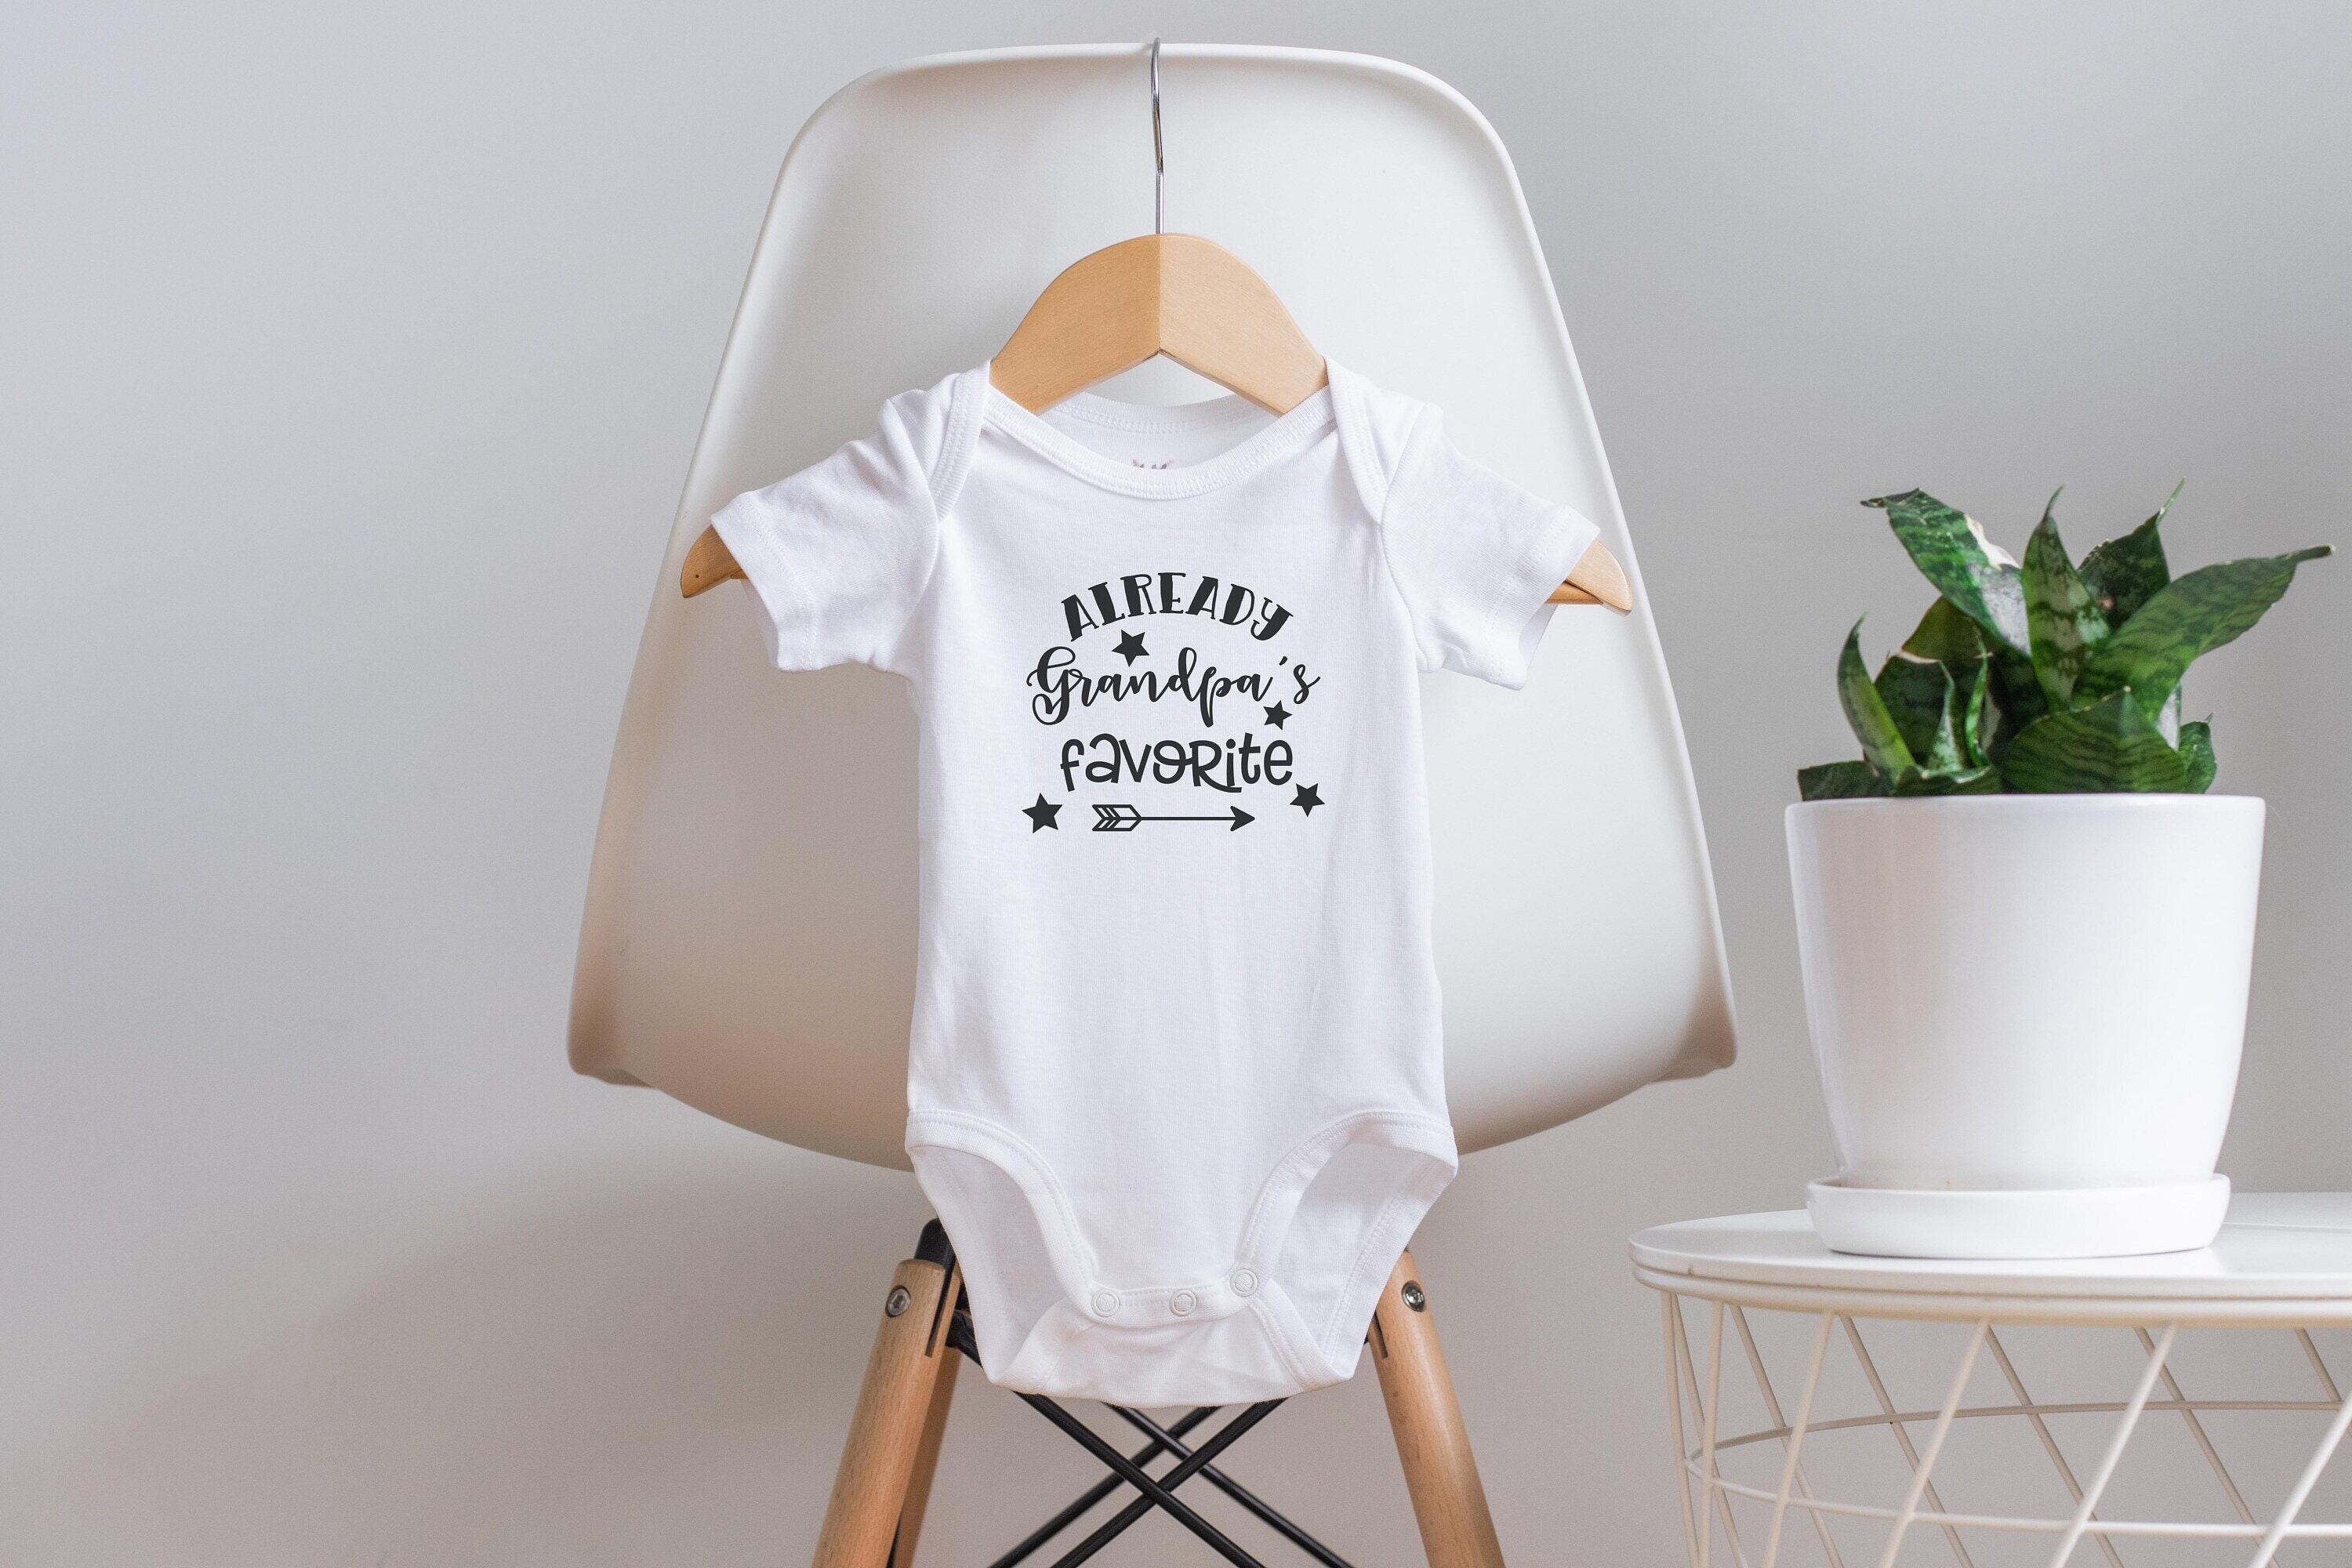 Clothing & Accessories :: Kids & Baby :: Baby Clothing :: Grandpa